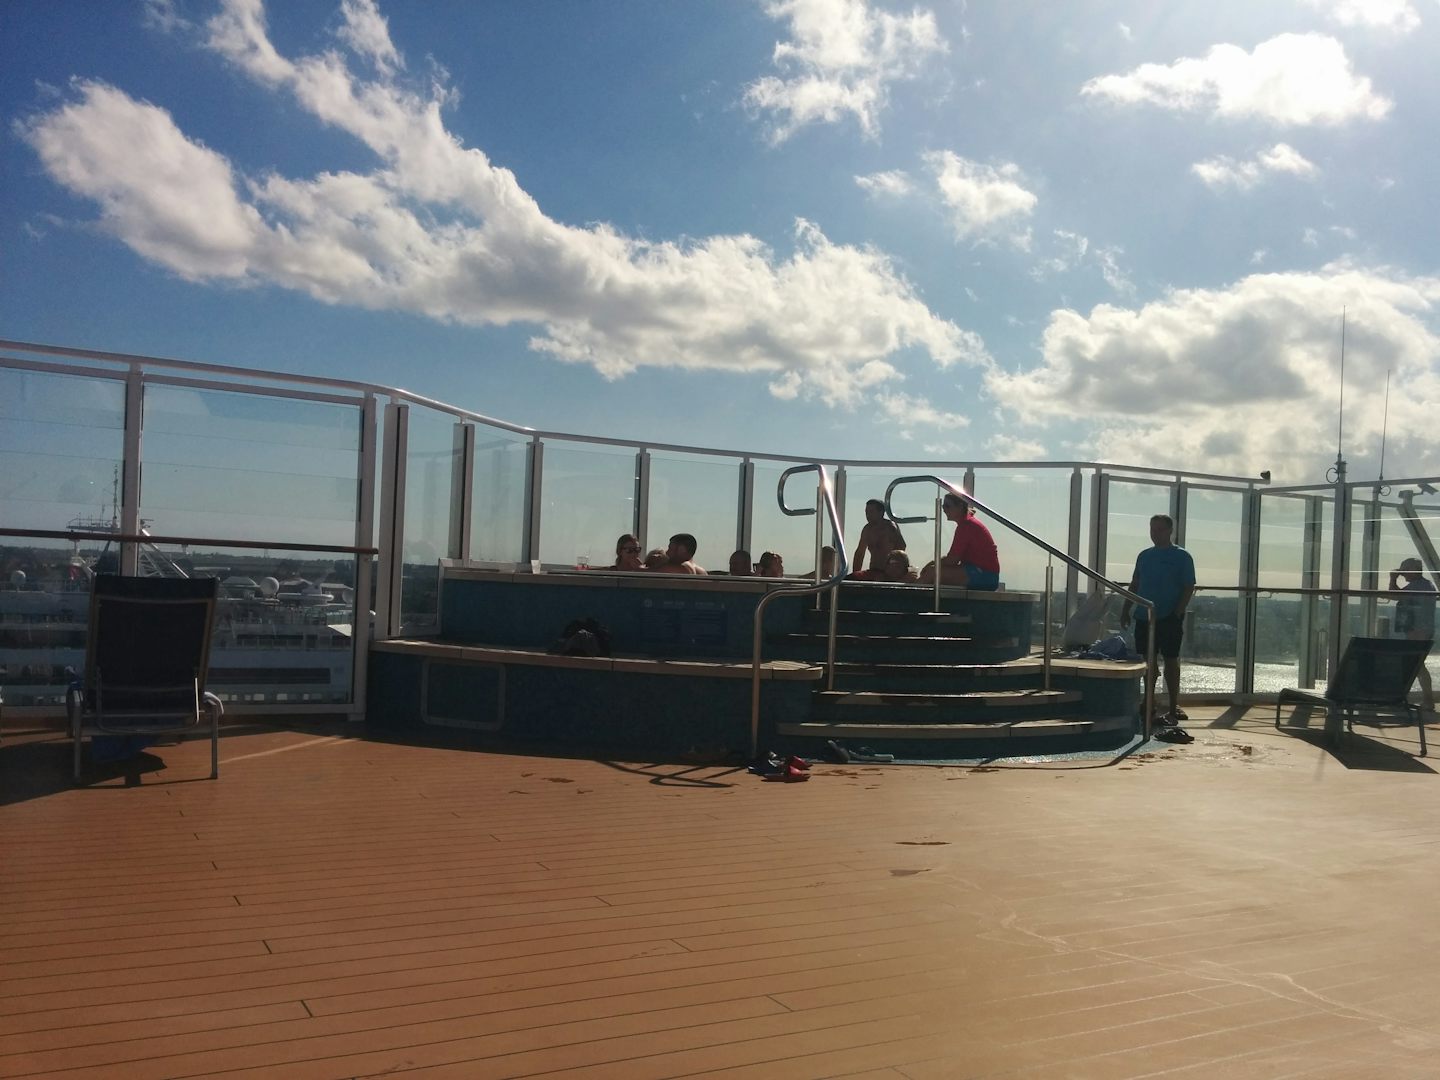 One of several cantelever hot tubs on top deck, was very popular spot and great vantage point. There is a bar steps away when thirsty.